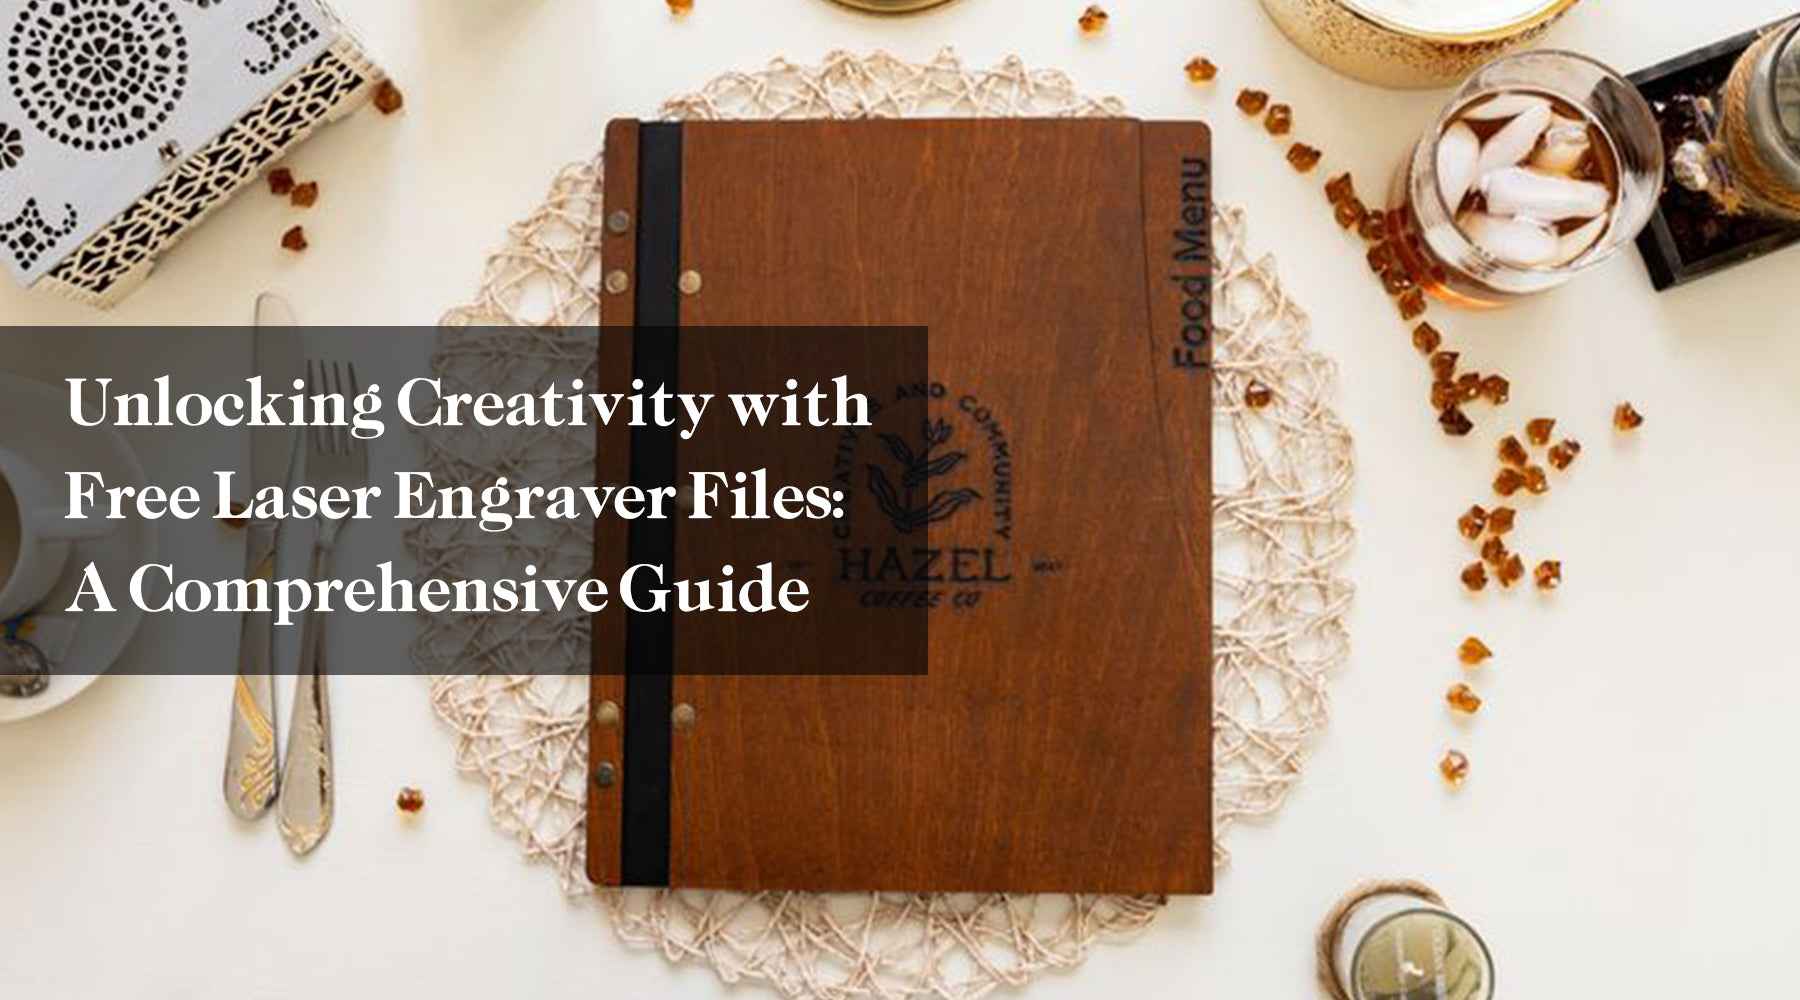 Unlocking Creativity with Free Laser Engraver Files: A Comprehensive Guide